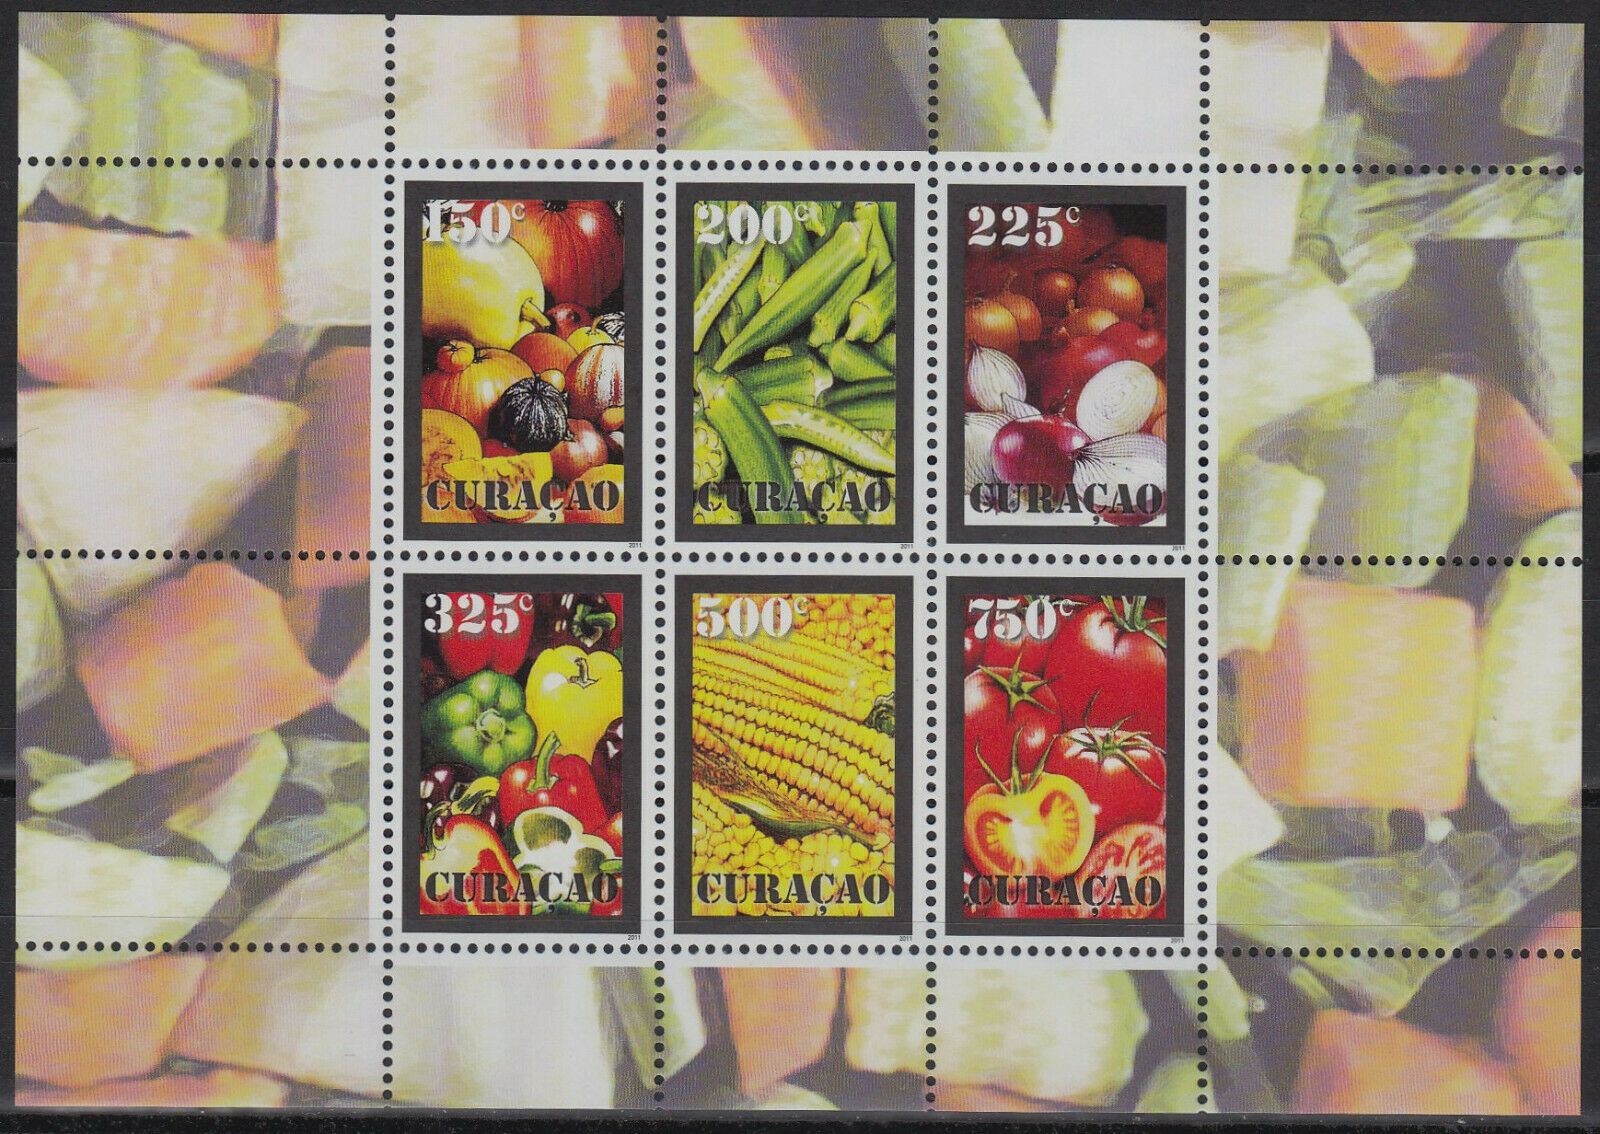 Curacao Issue 2011 (65)